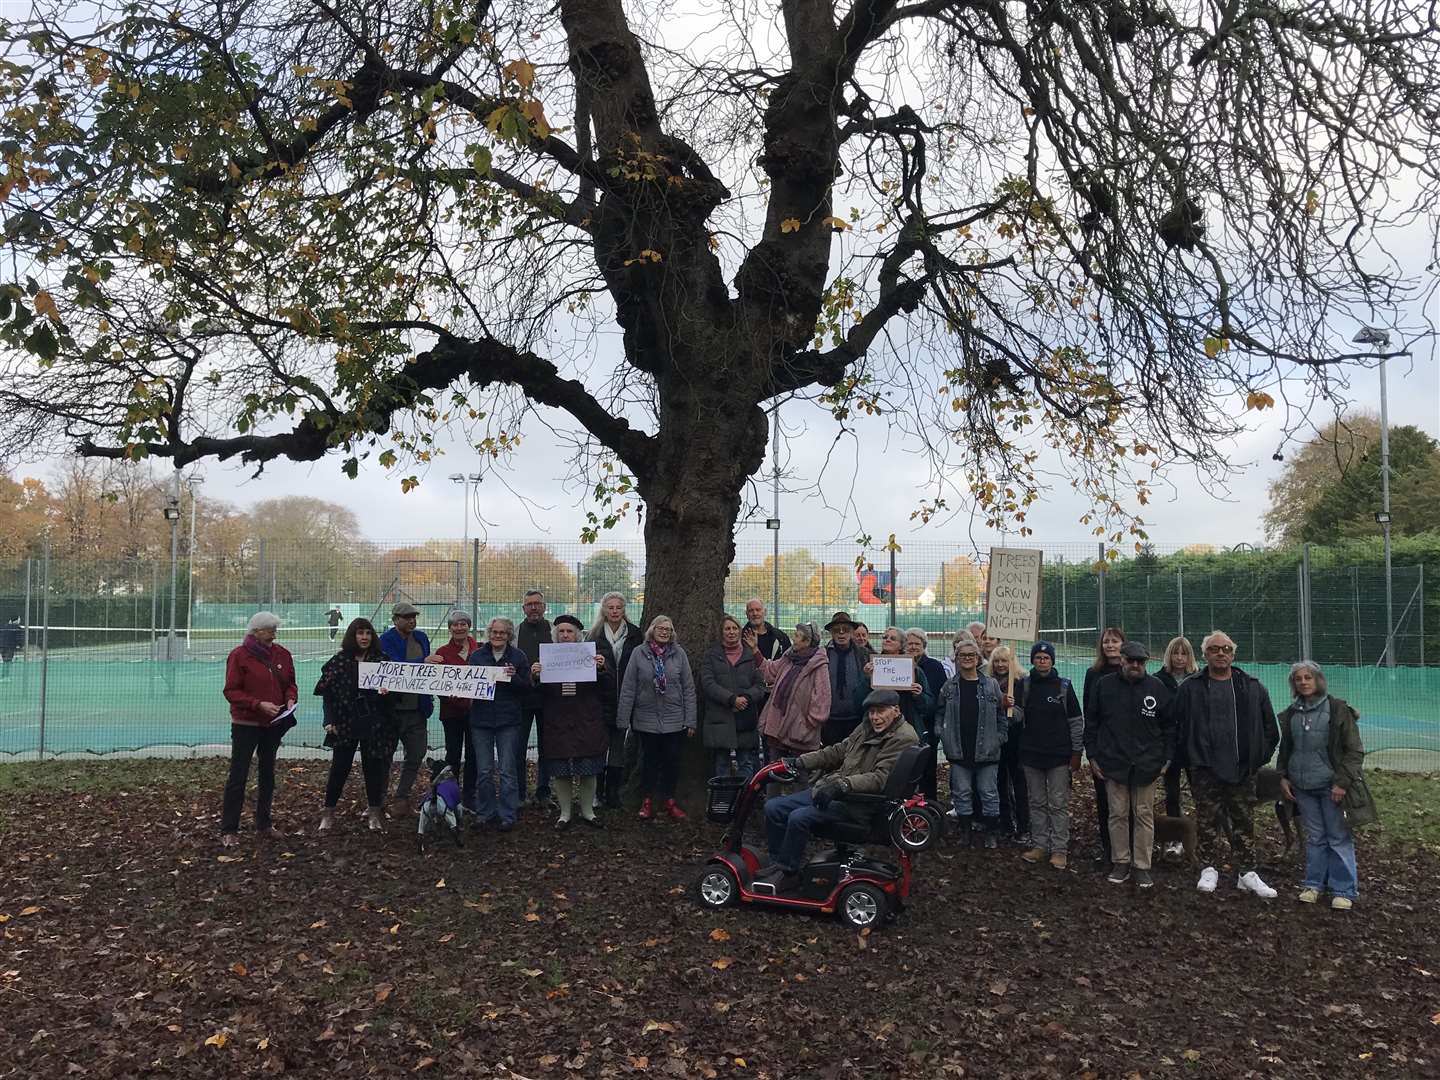 Faversham residents gathered by the tree in large numbers last month to show their anger